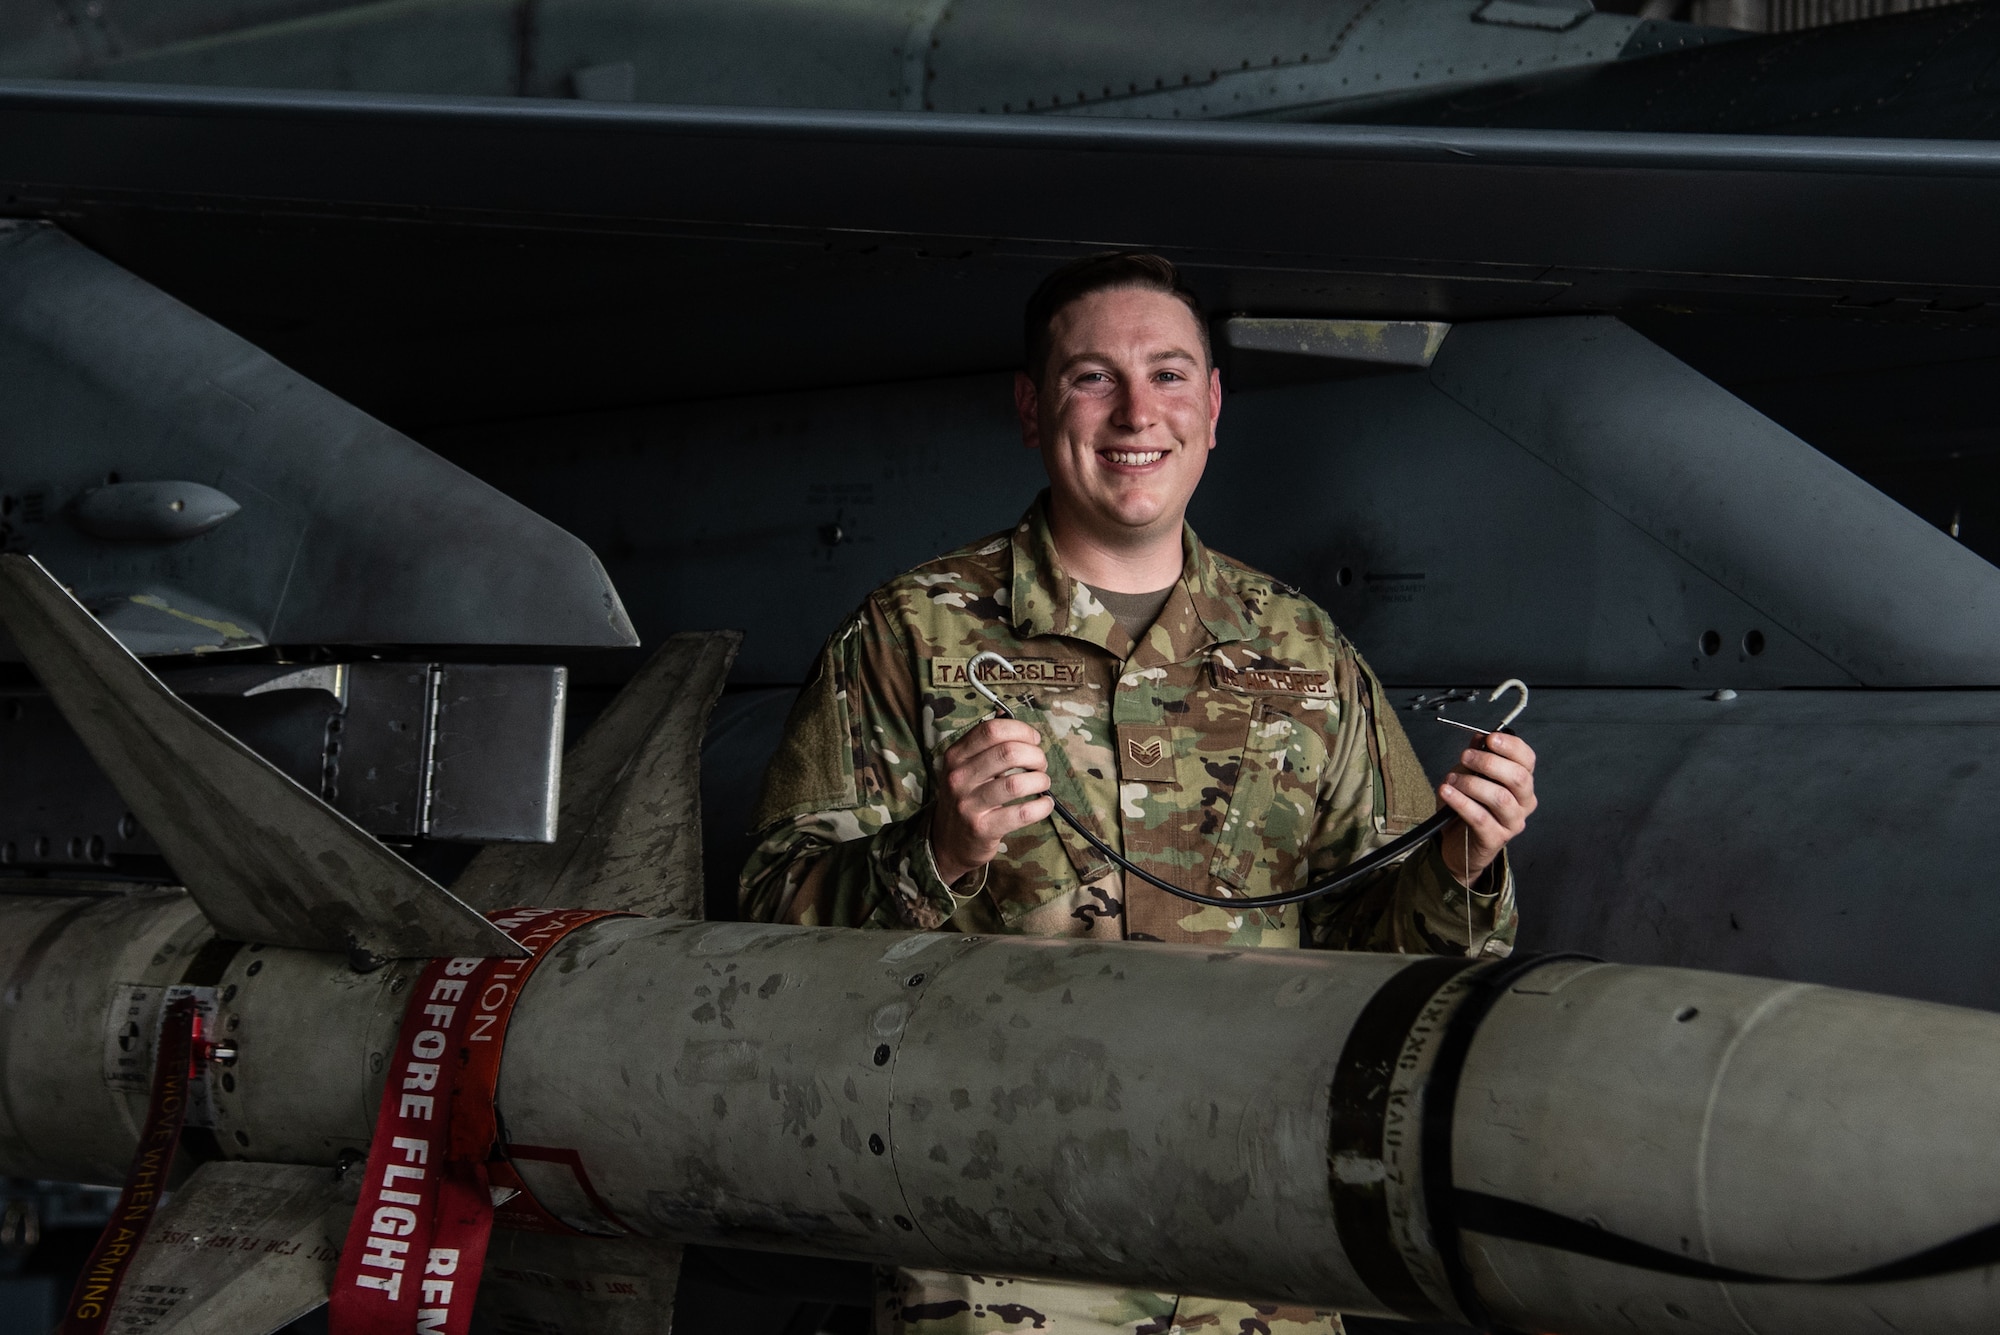 U.S. Air Force Staff Sgt. Justin Tankersley, 20th Maintenance Group weapons lead crew chief, holds up the tool he invented to save the Air Force time and money at Shaw Air Force Base, S.C., Oct. 16, 2018.